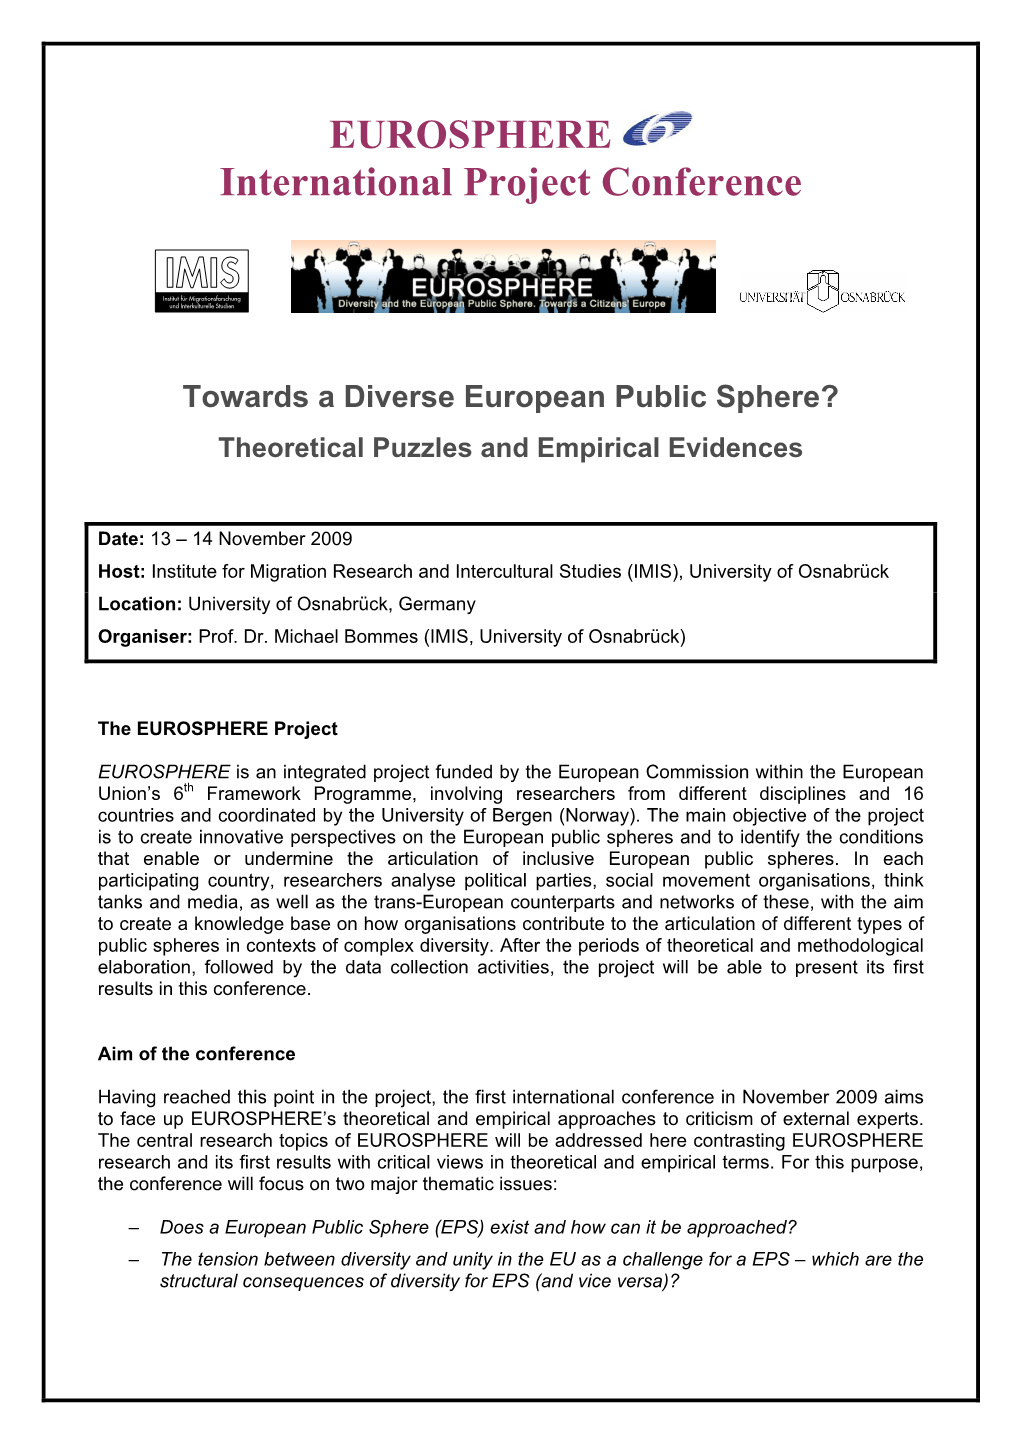 EUROSPHERE International Project Conference Towards a Diverse